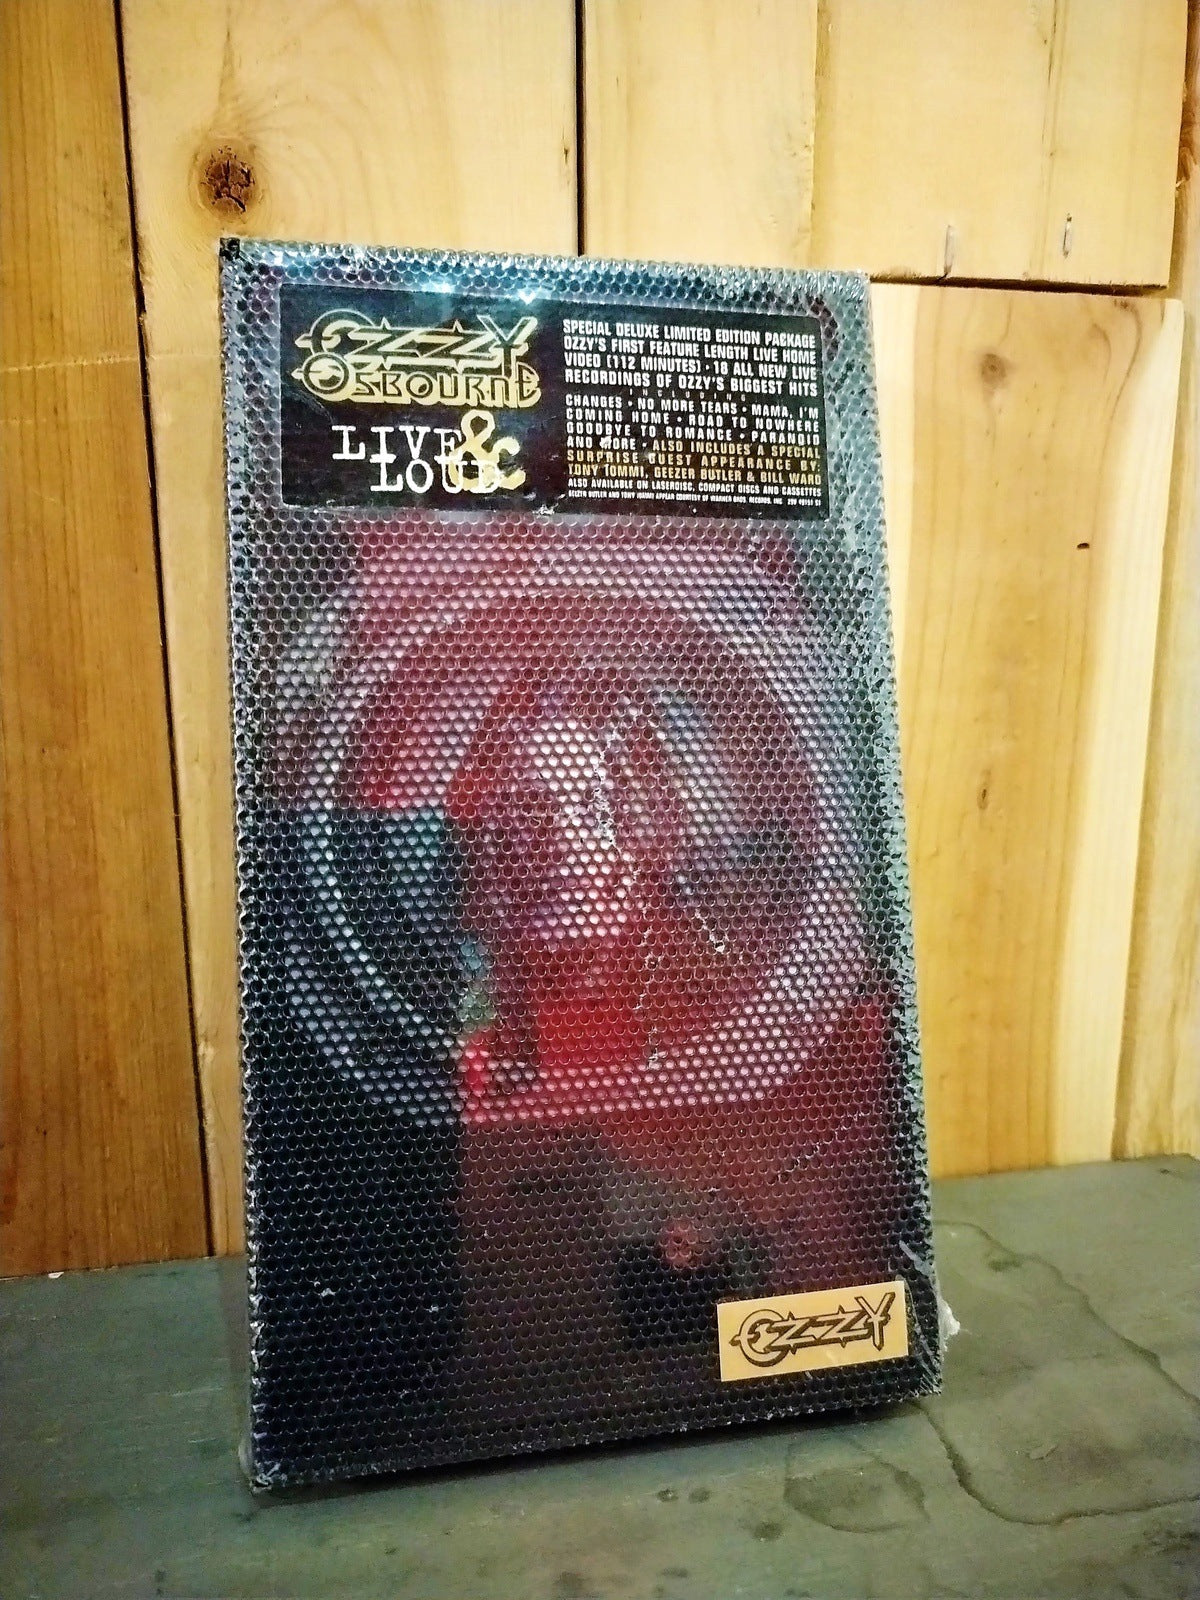 Ozzy "Live & Loud" VHS Cassette Unopened